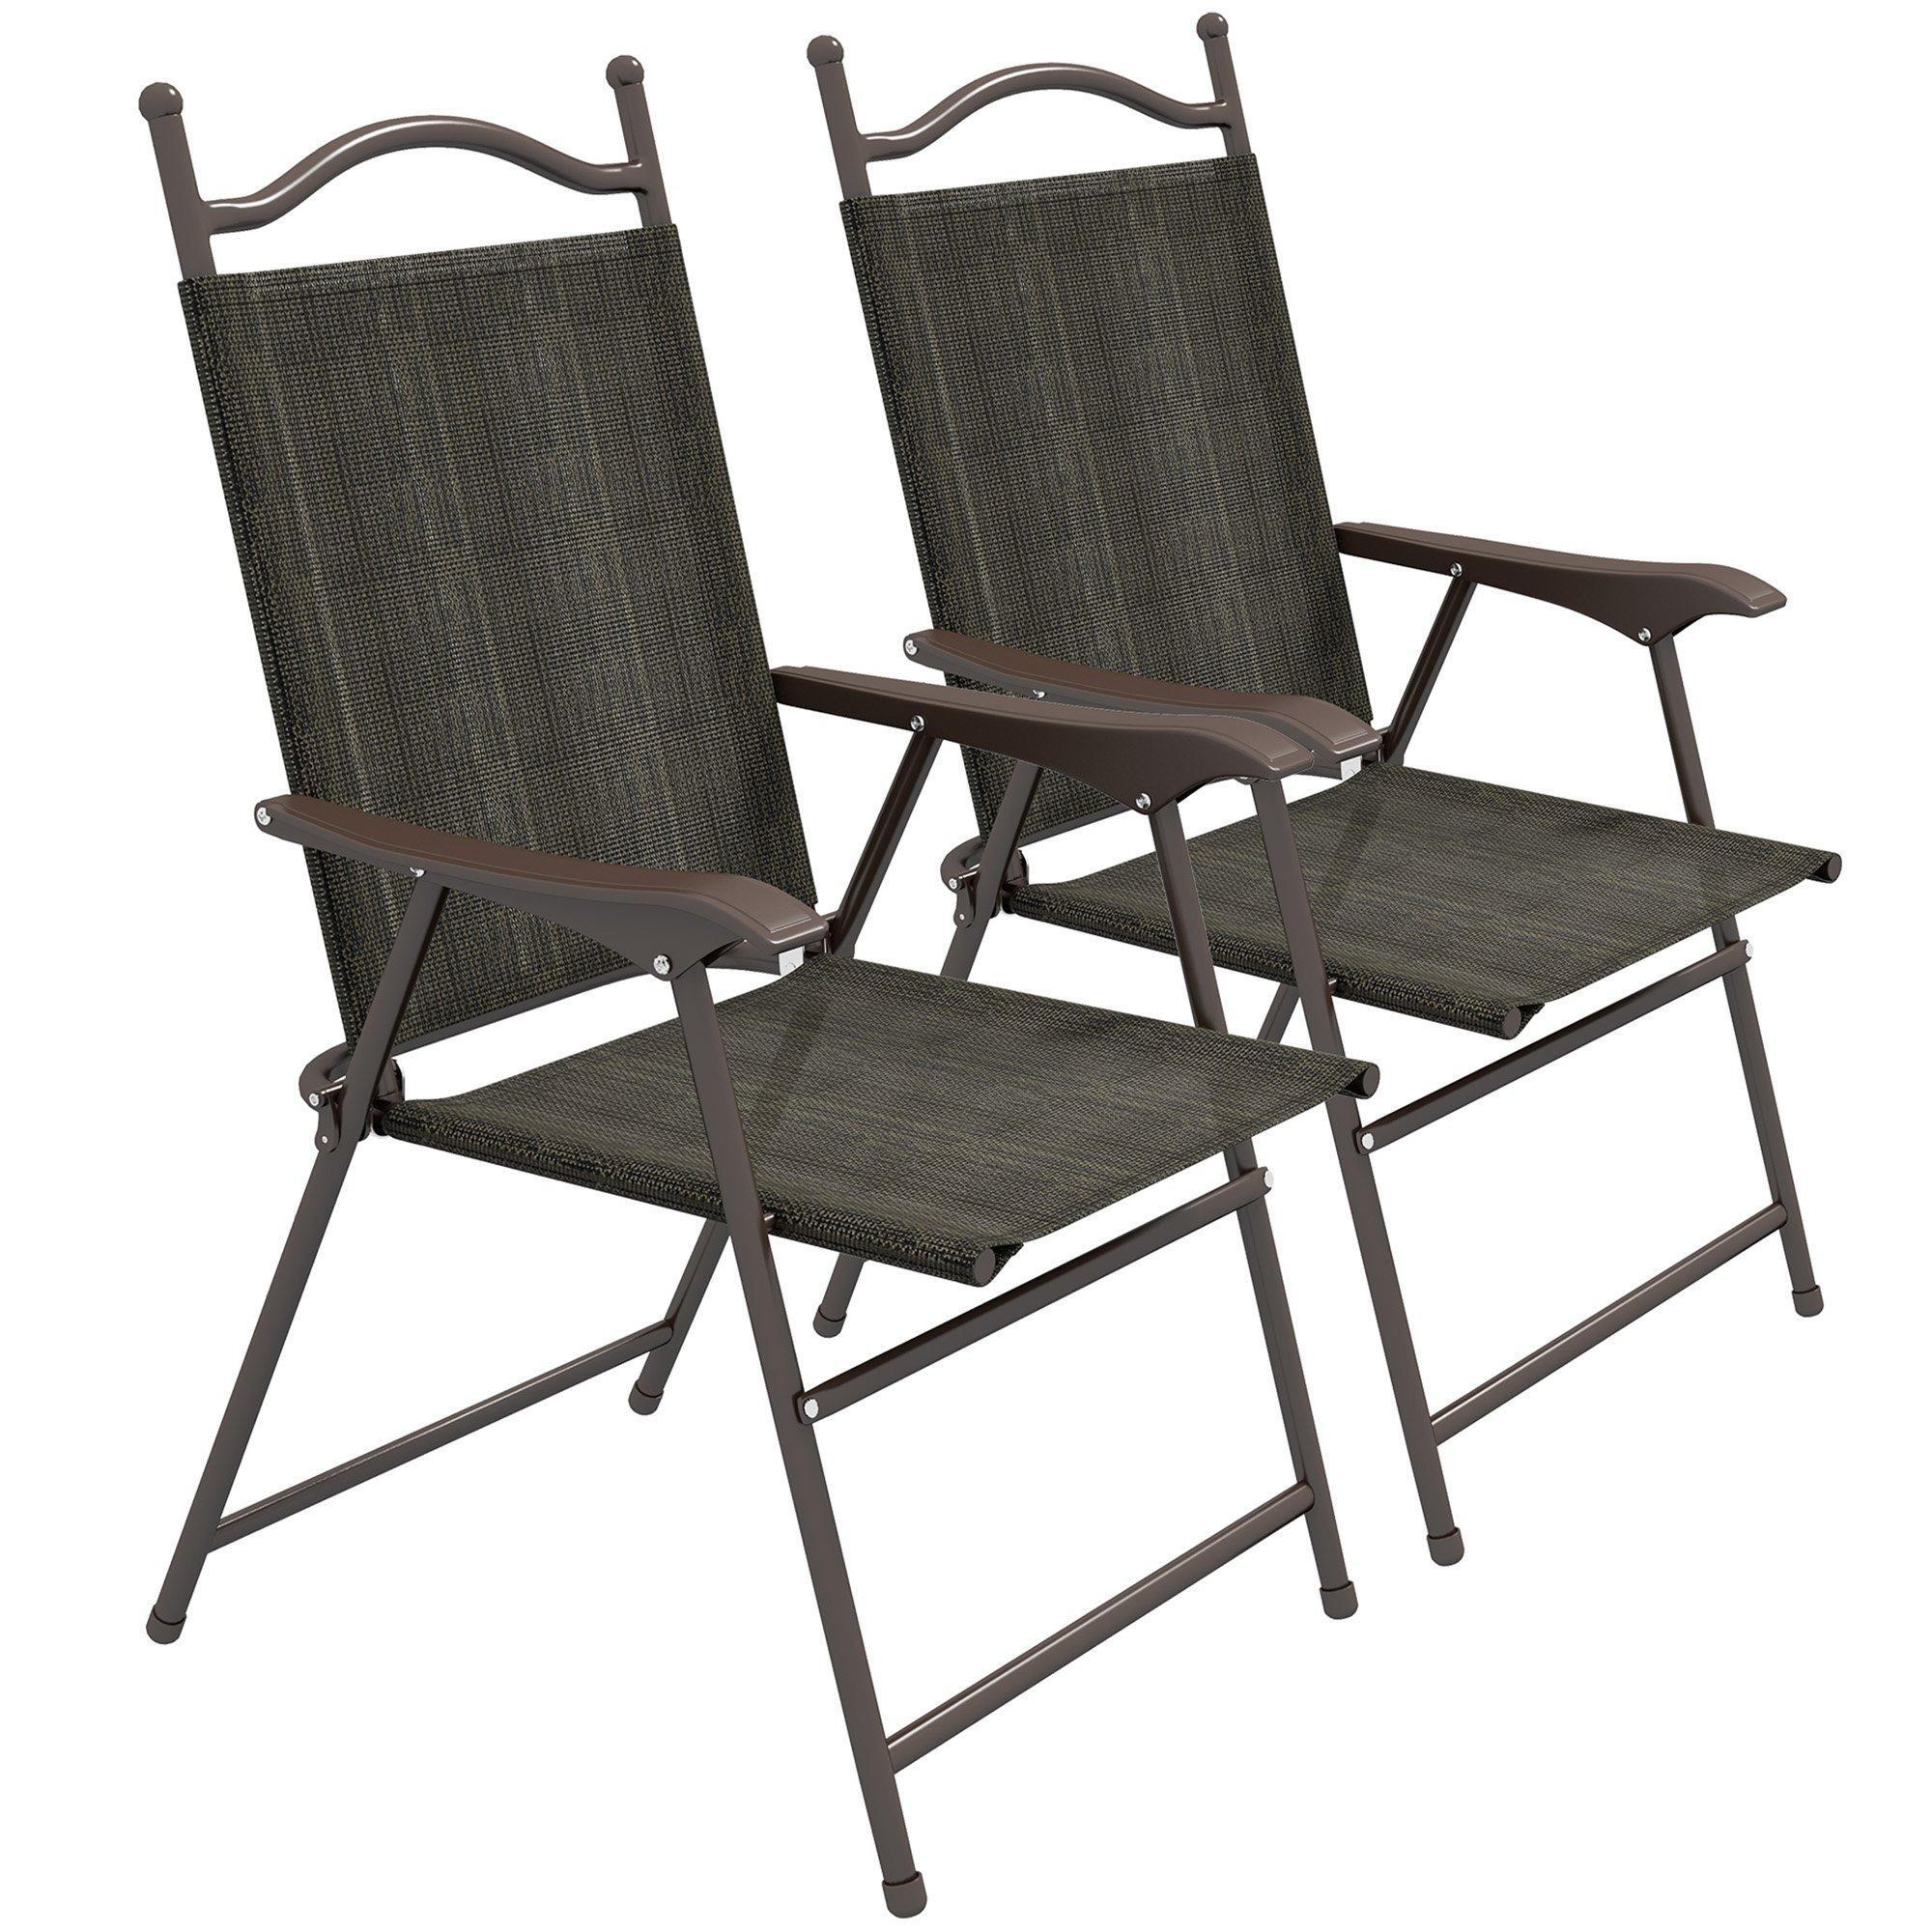 Patio Garden Chairs with Foldable Design, Sports Chairs - image 1